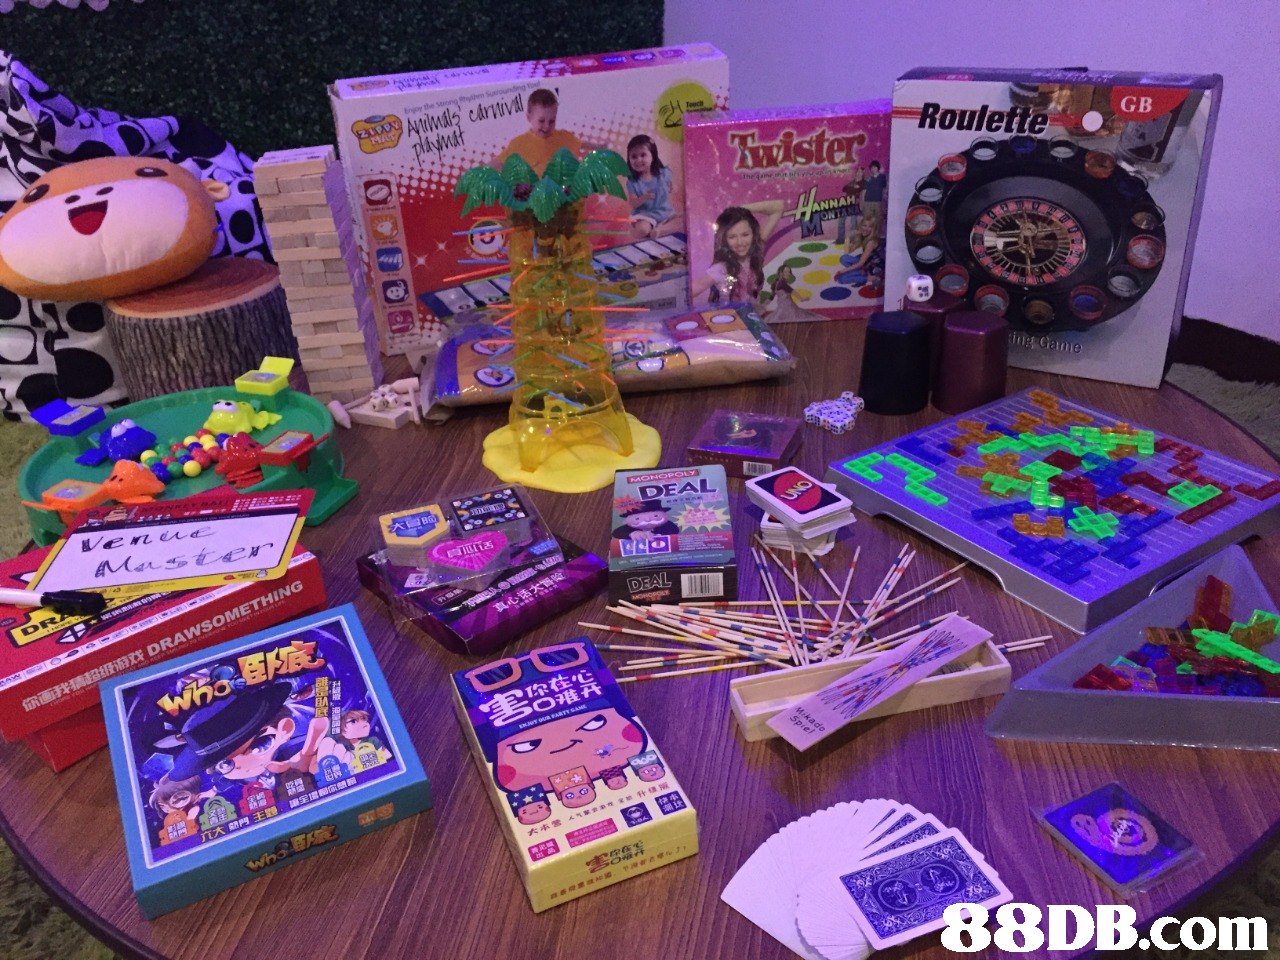 Roulette GB ANNAH DEAL DEAL 口难开 8DB.com  purple,toy,product